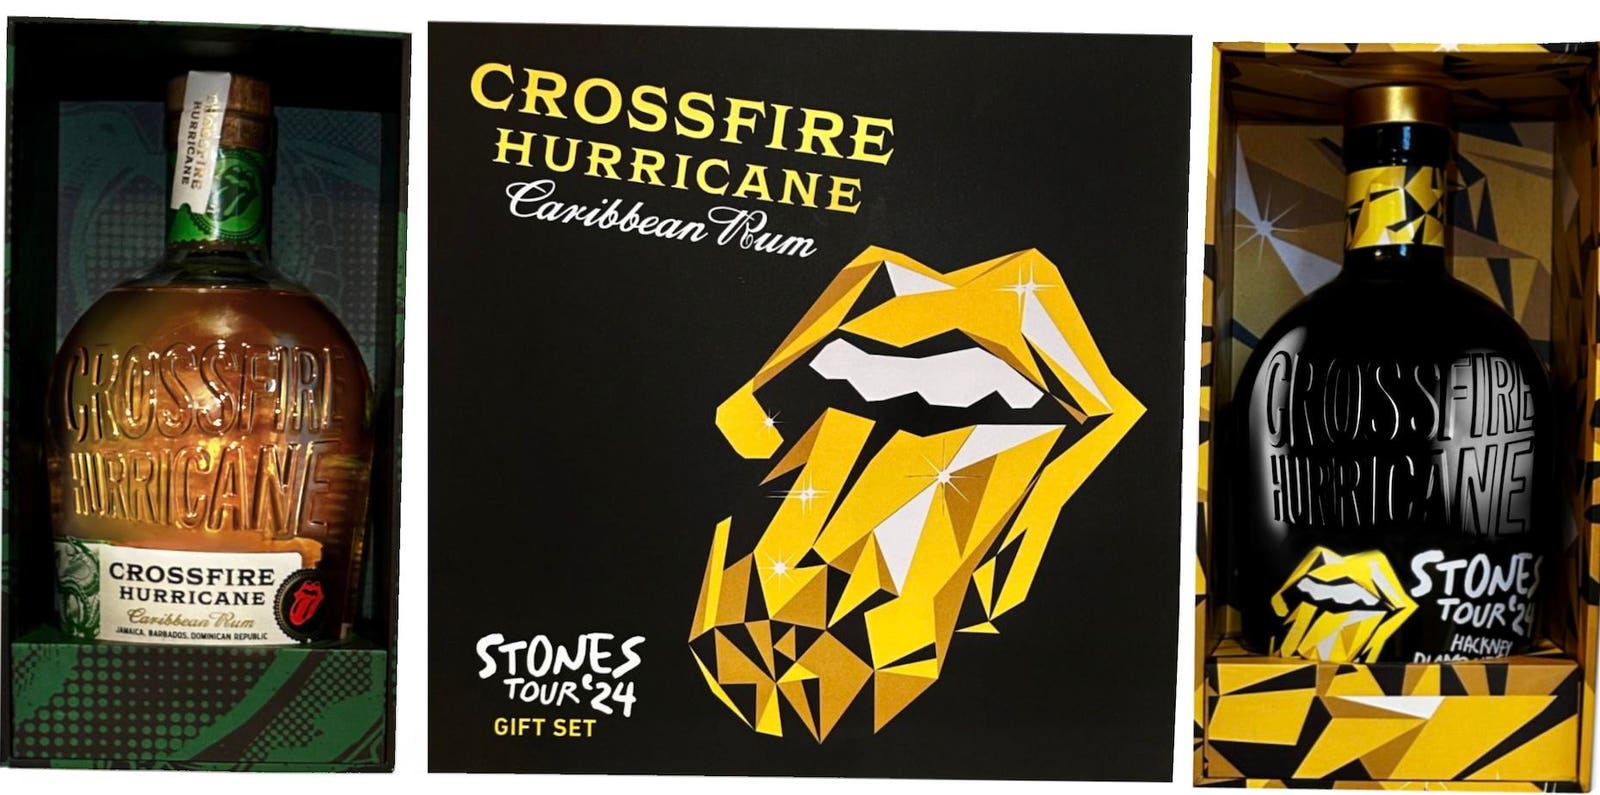 The Rolling Stones Crossfire Hurricane Rum Is Releasing A Limited-Edition Hackney Diamonds Bottle